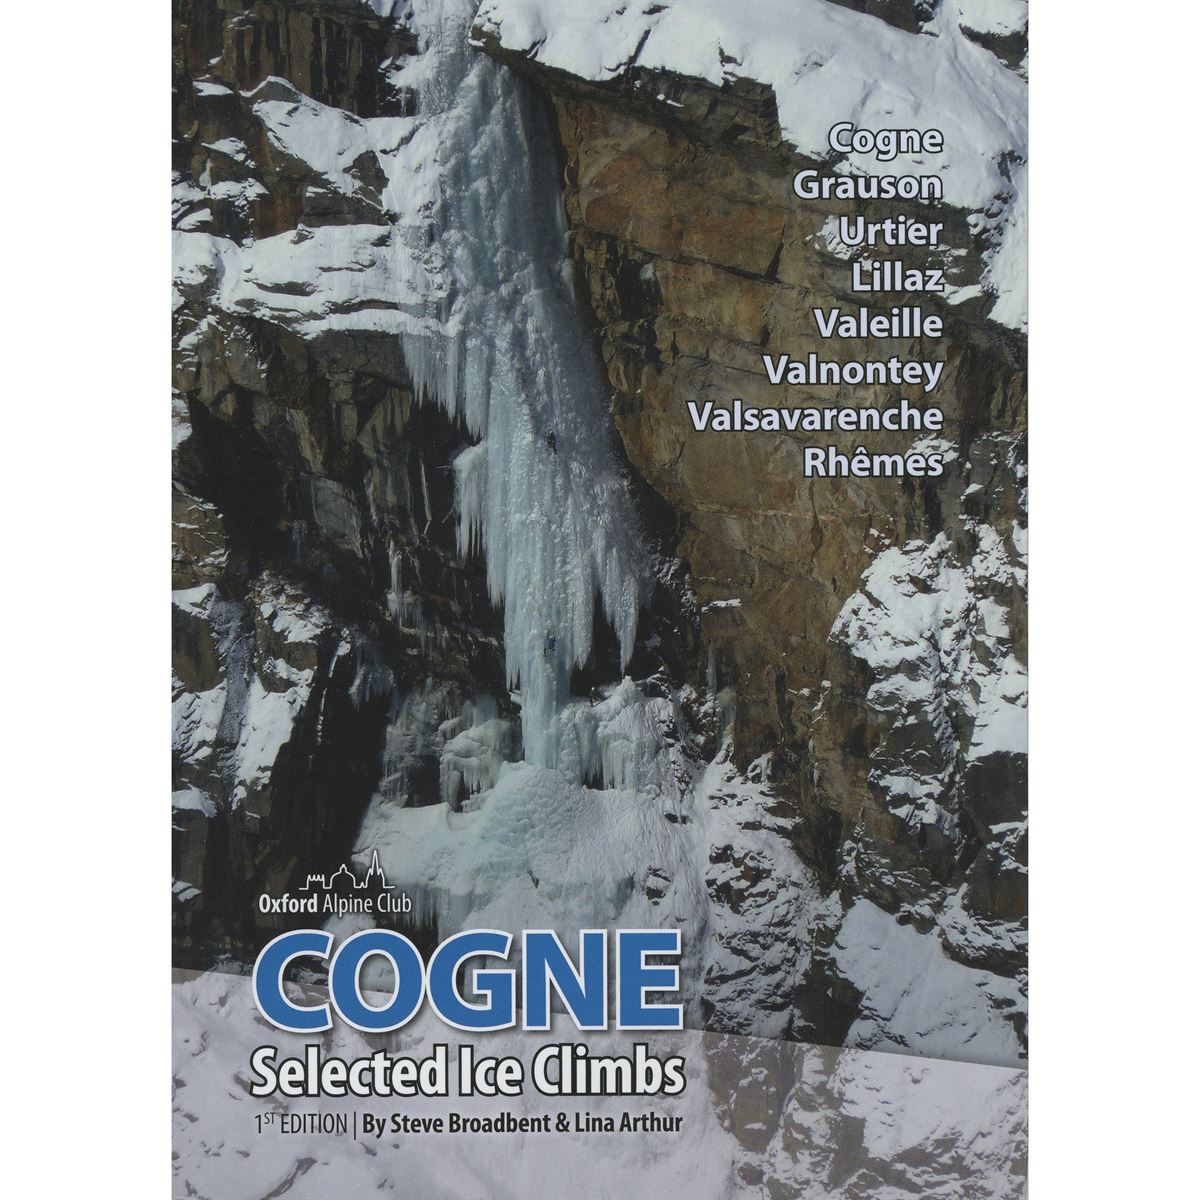 Cogne: Selected Ice Climbs